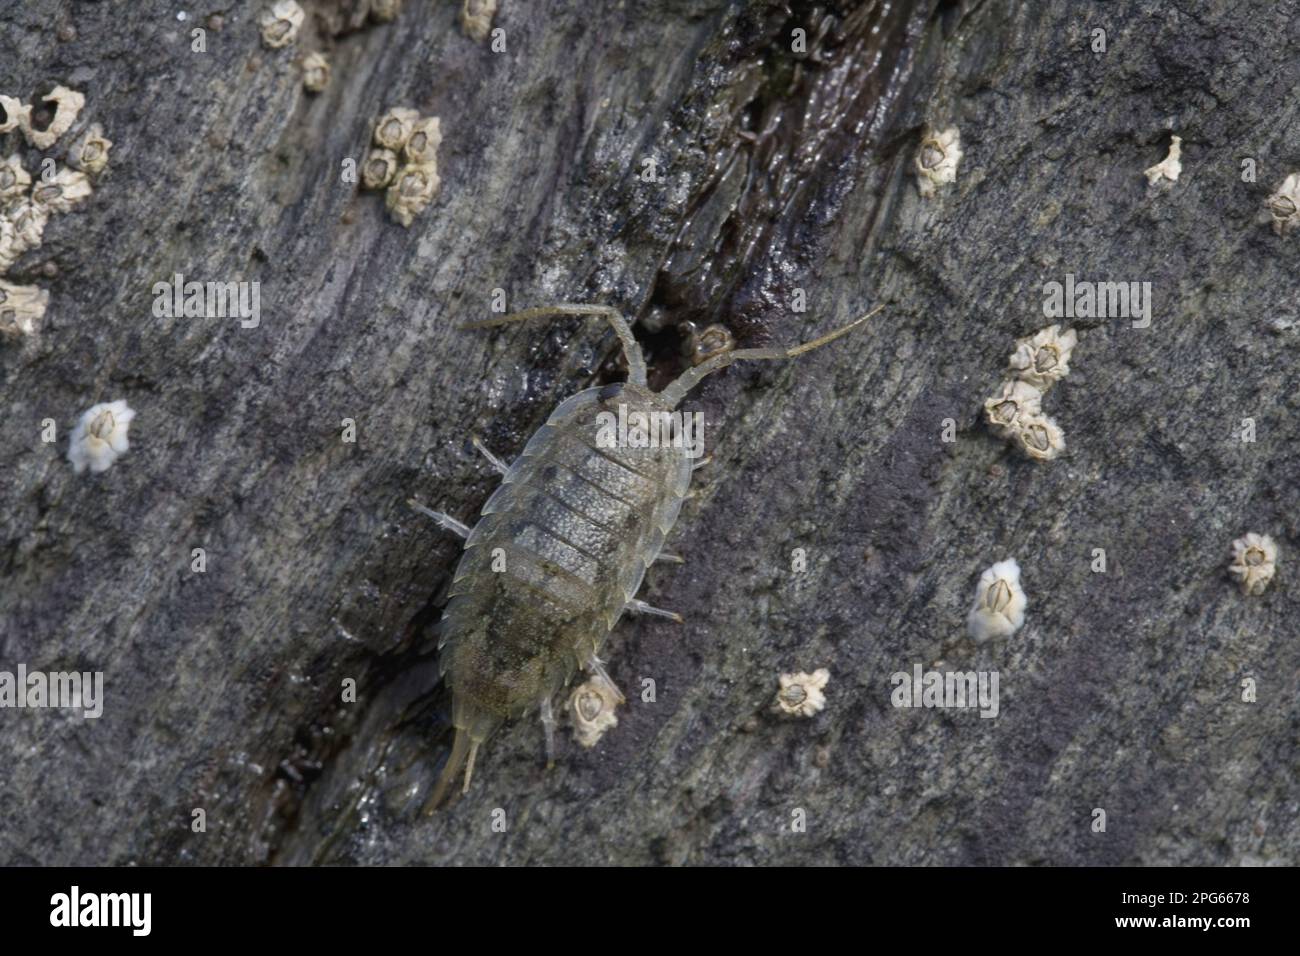 Sea roach, Cliff isopods (Isopoda), Other animals, Animals, Sea Slater (Ligia oceanica) adult, on shore rock covered with barnacles, near Polperro Stock Photo